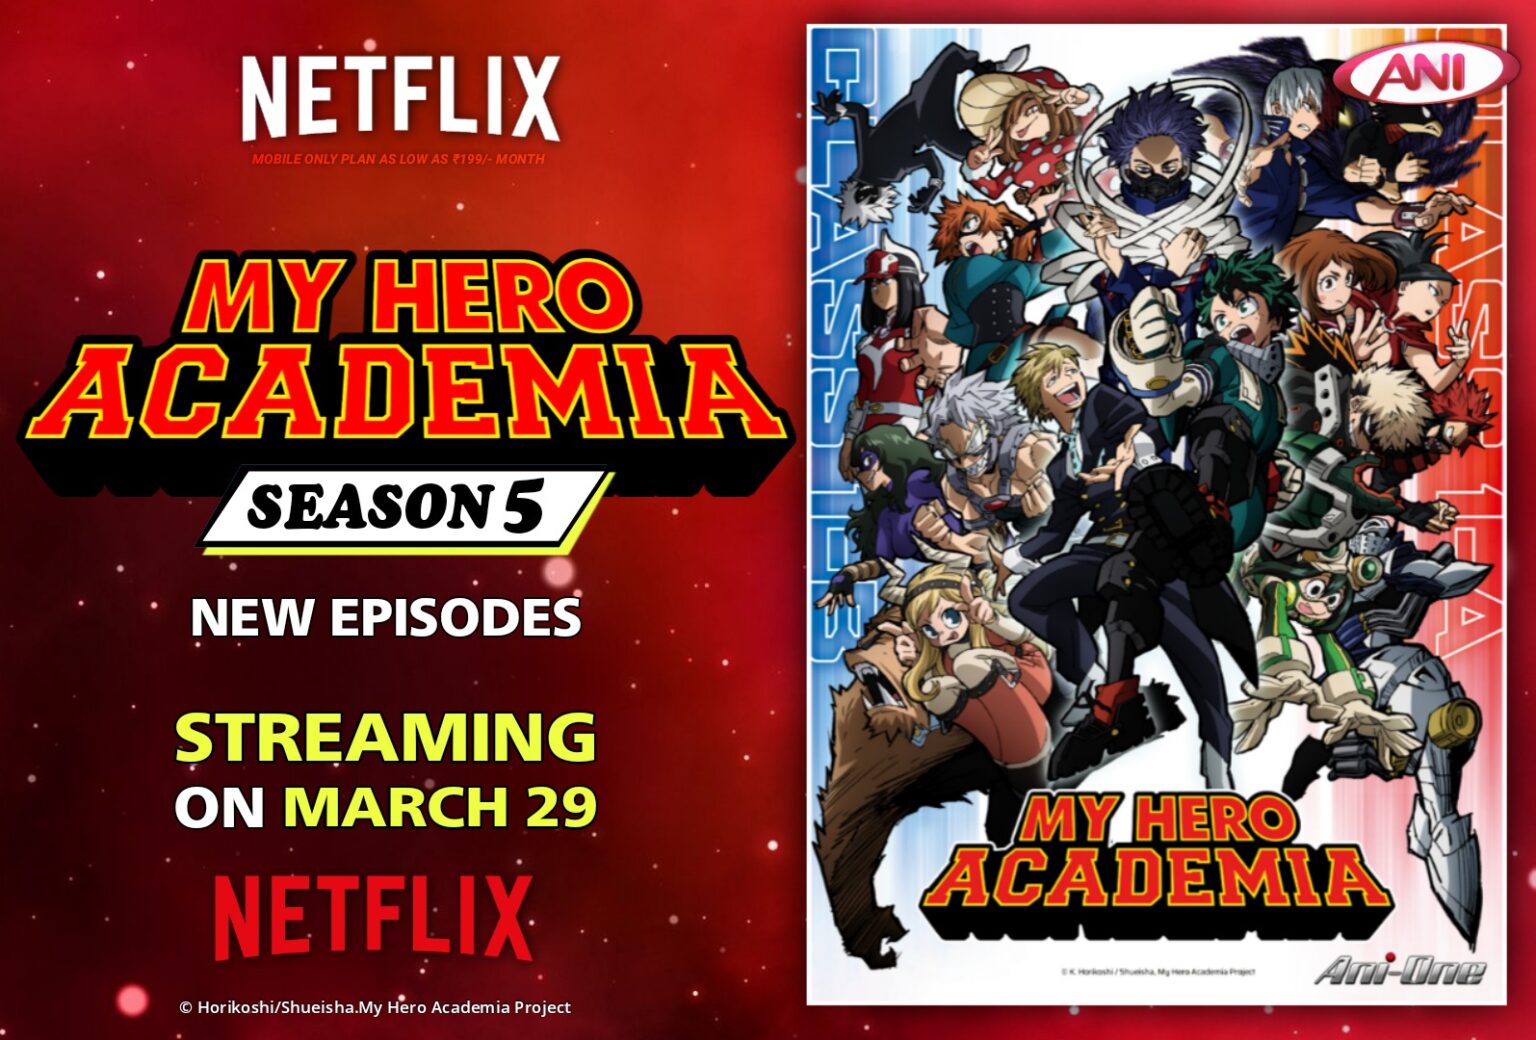 what production company is making the my hero academia movie